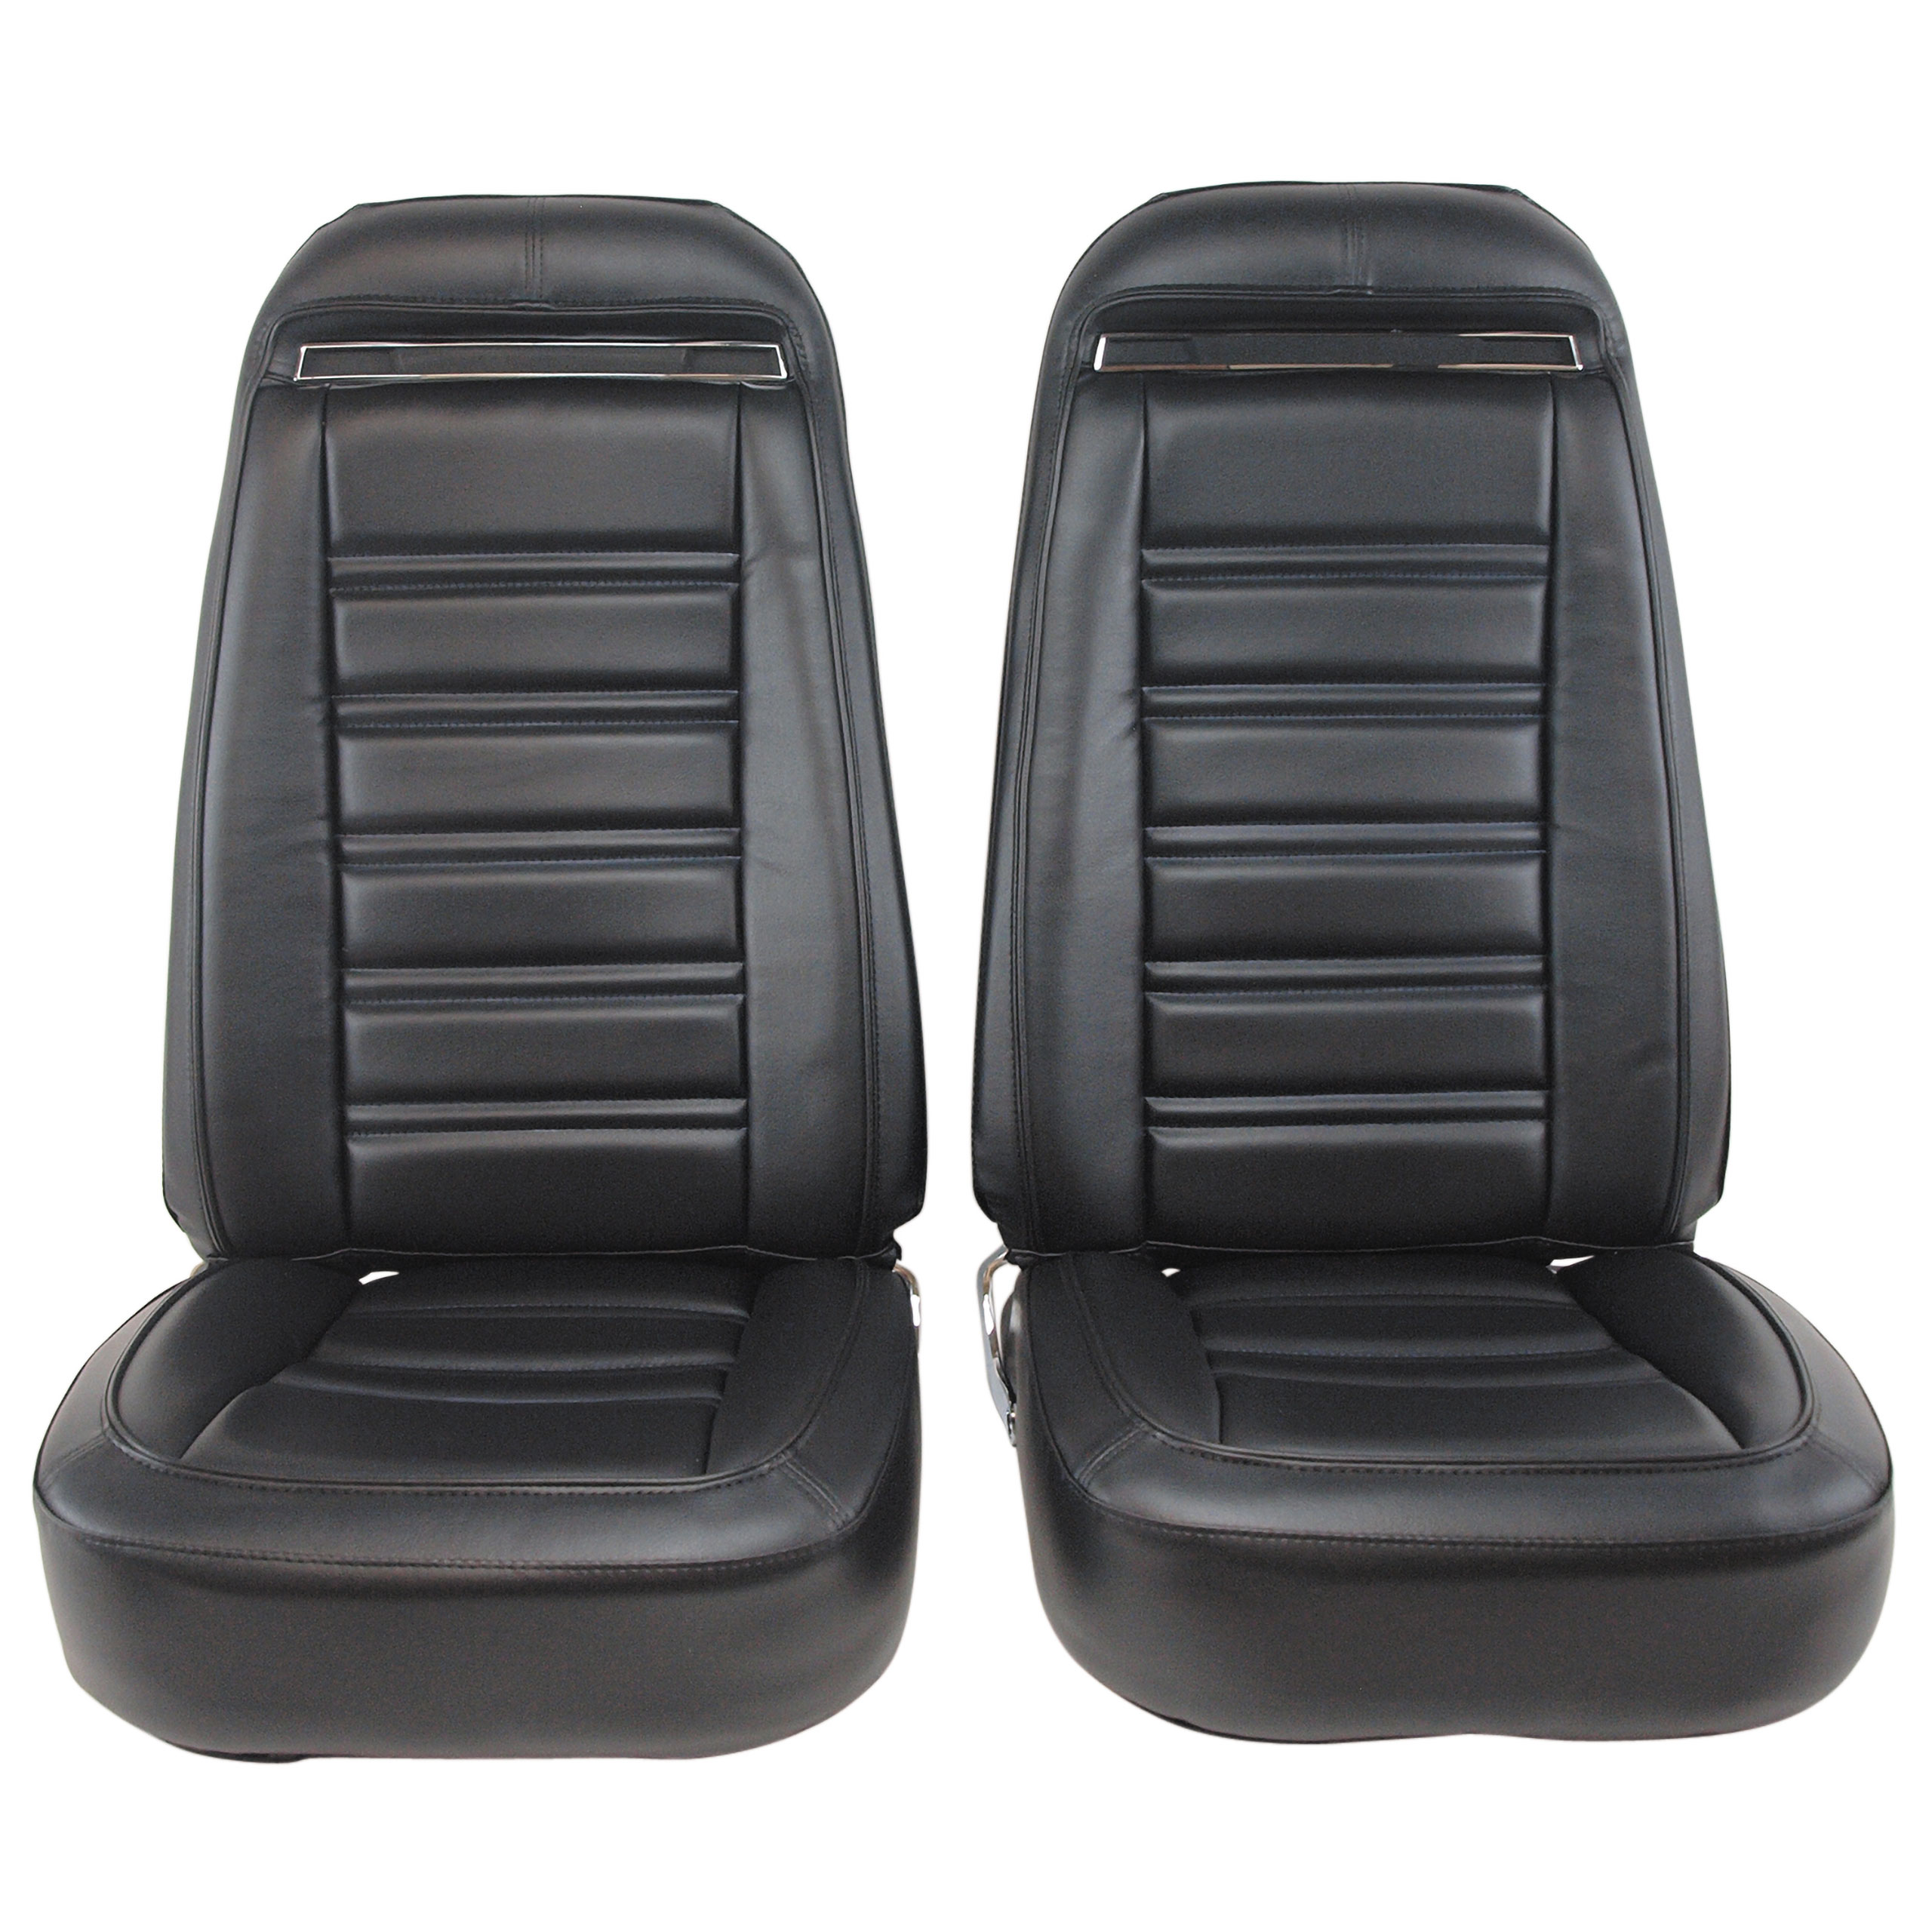 1975 C3 Corvette Mounted Seats Black "Leather-Like" Vinyl Without Shoulder Harness